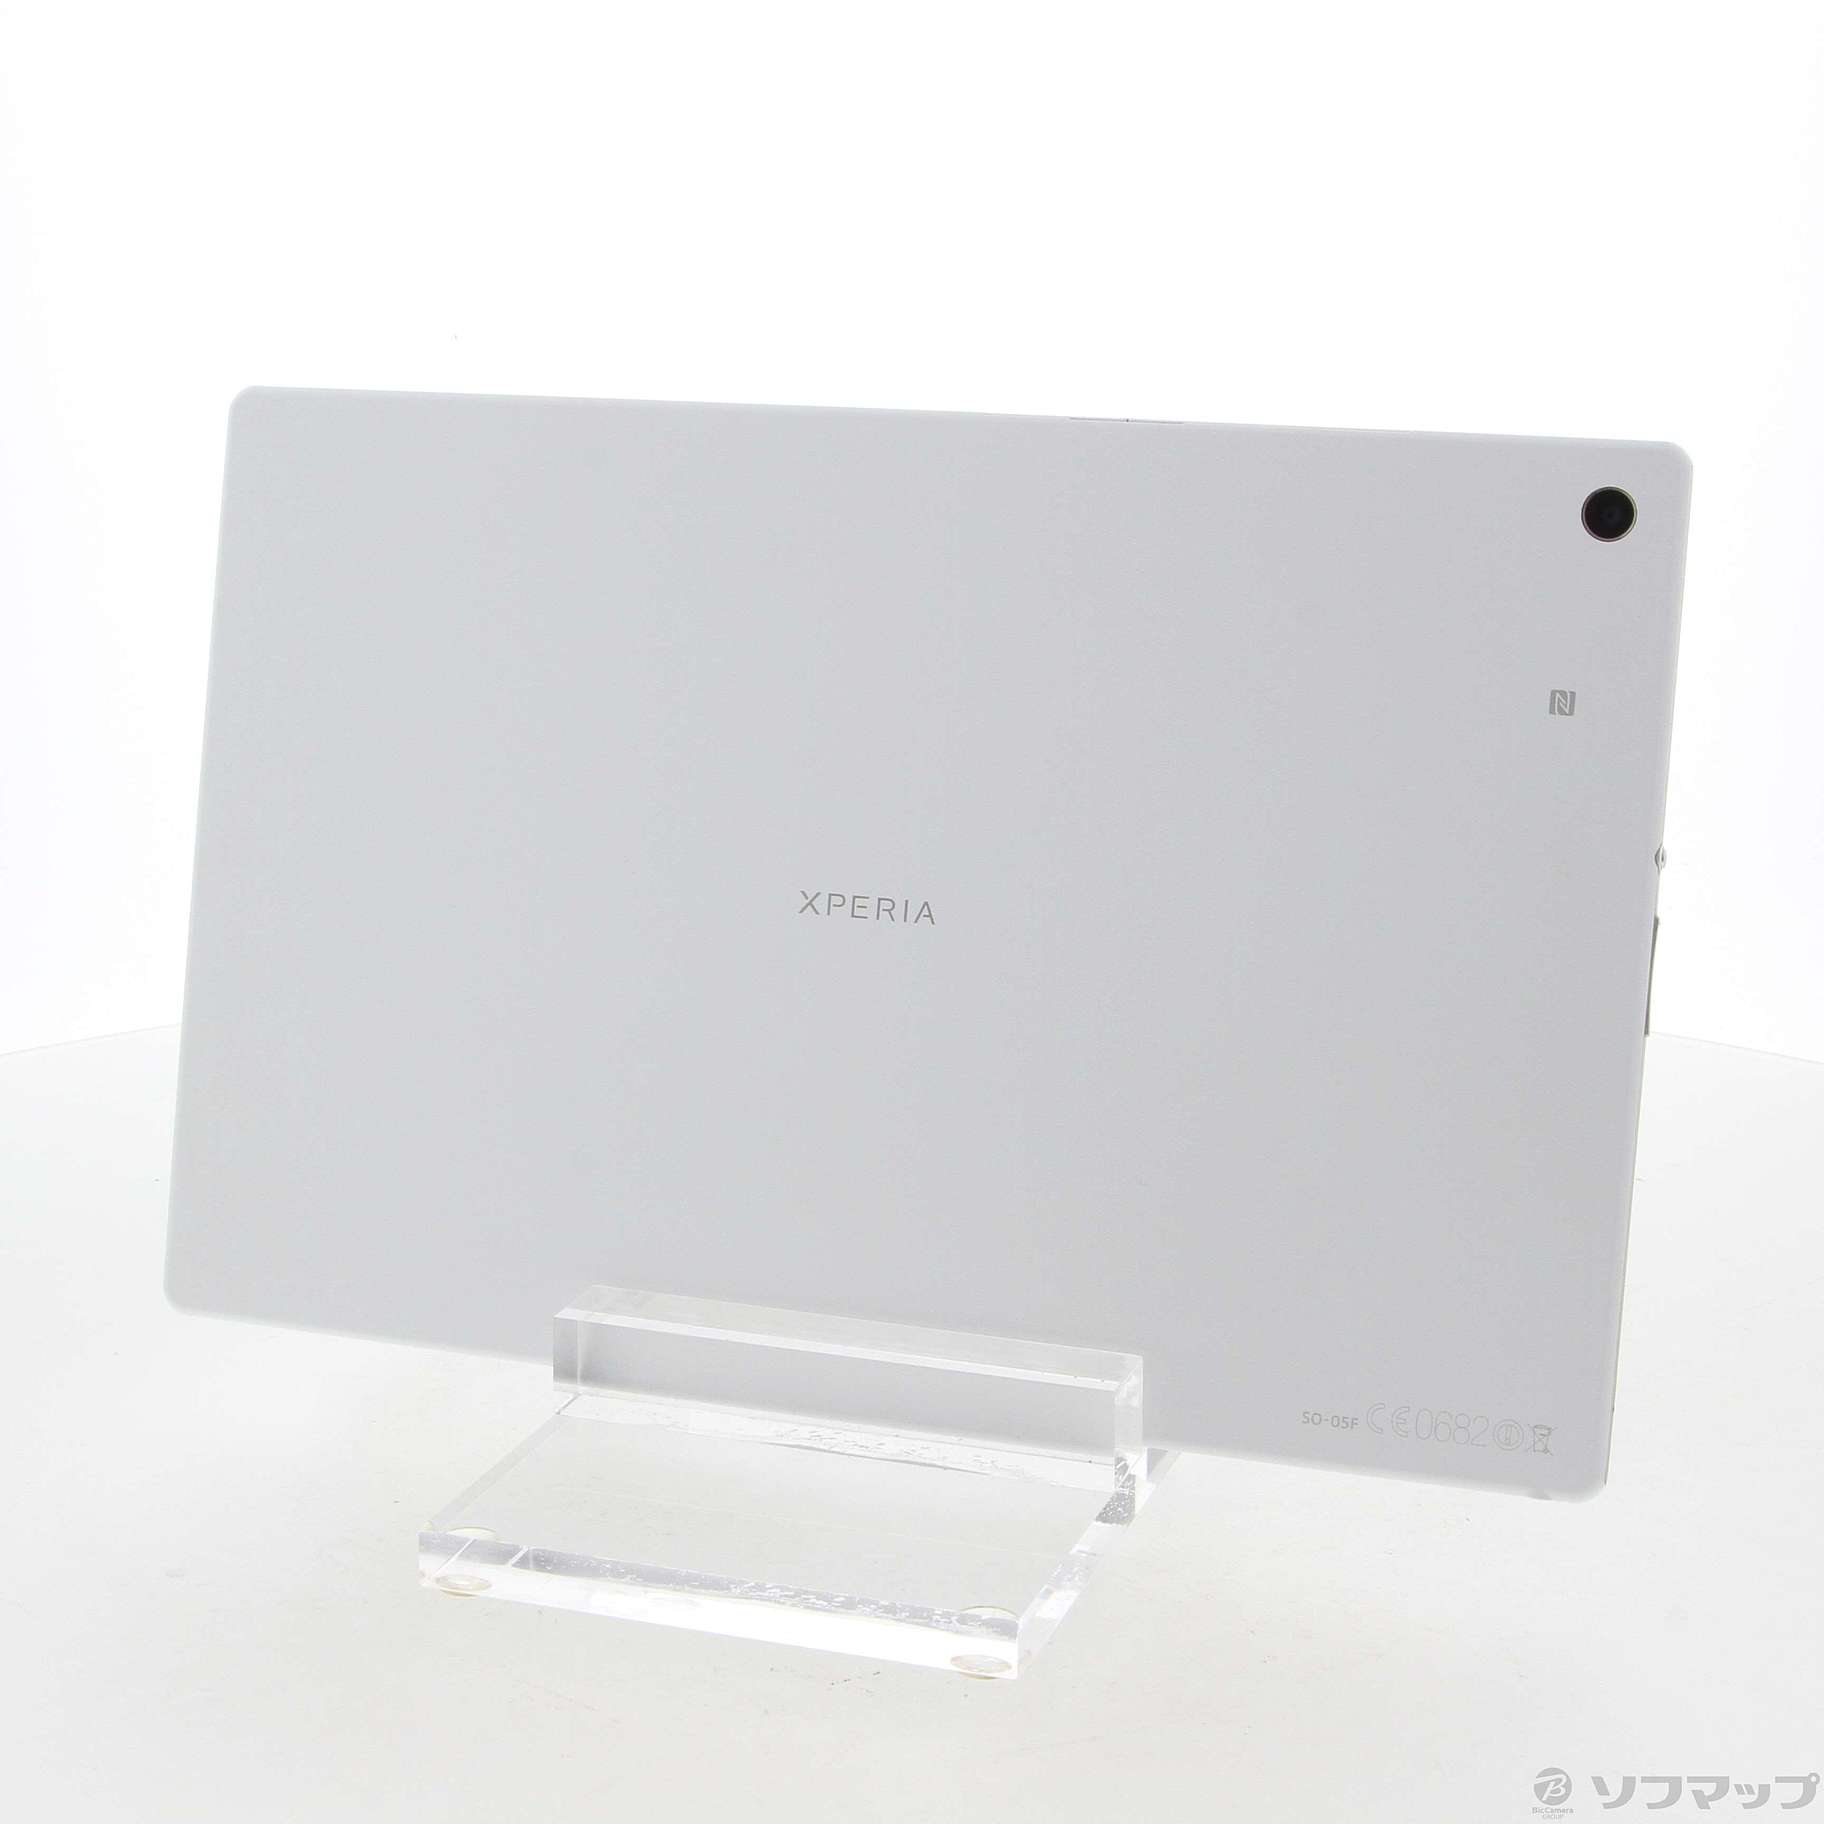 XPERIA　タブレット　SO-05fタブレット